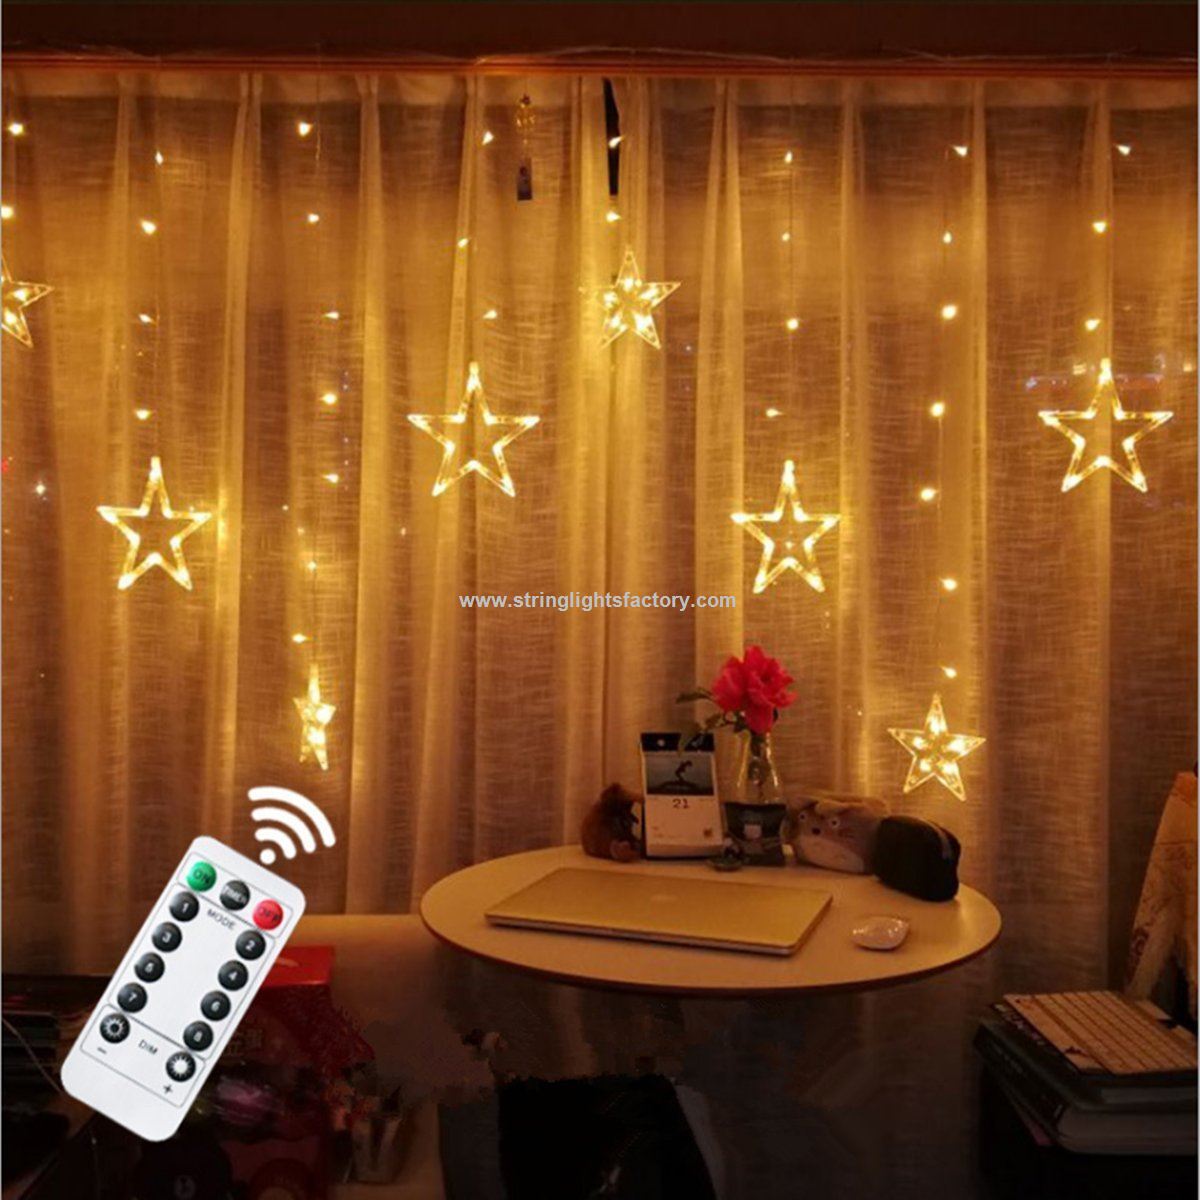 USB Port and Battery 2 Ways to Power 138LEDs Star String Lights with Remote Control